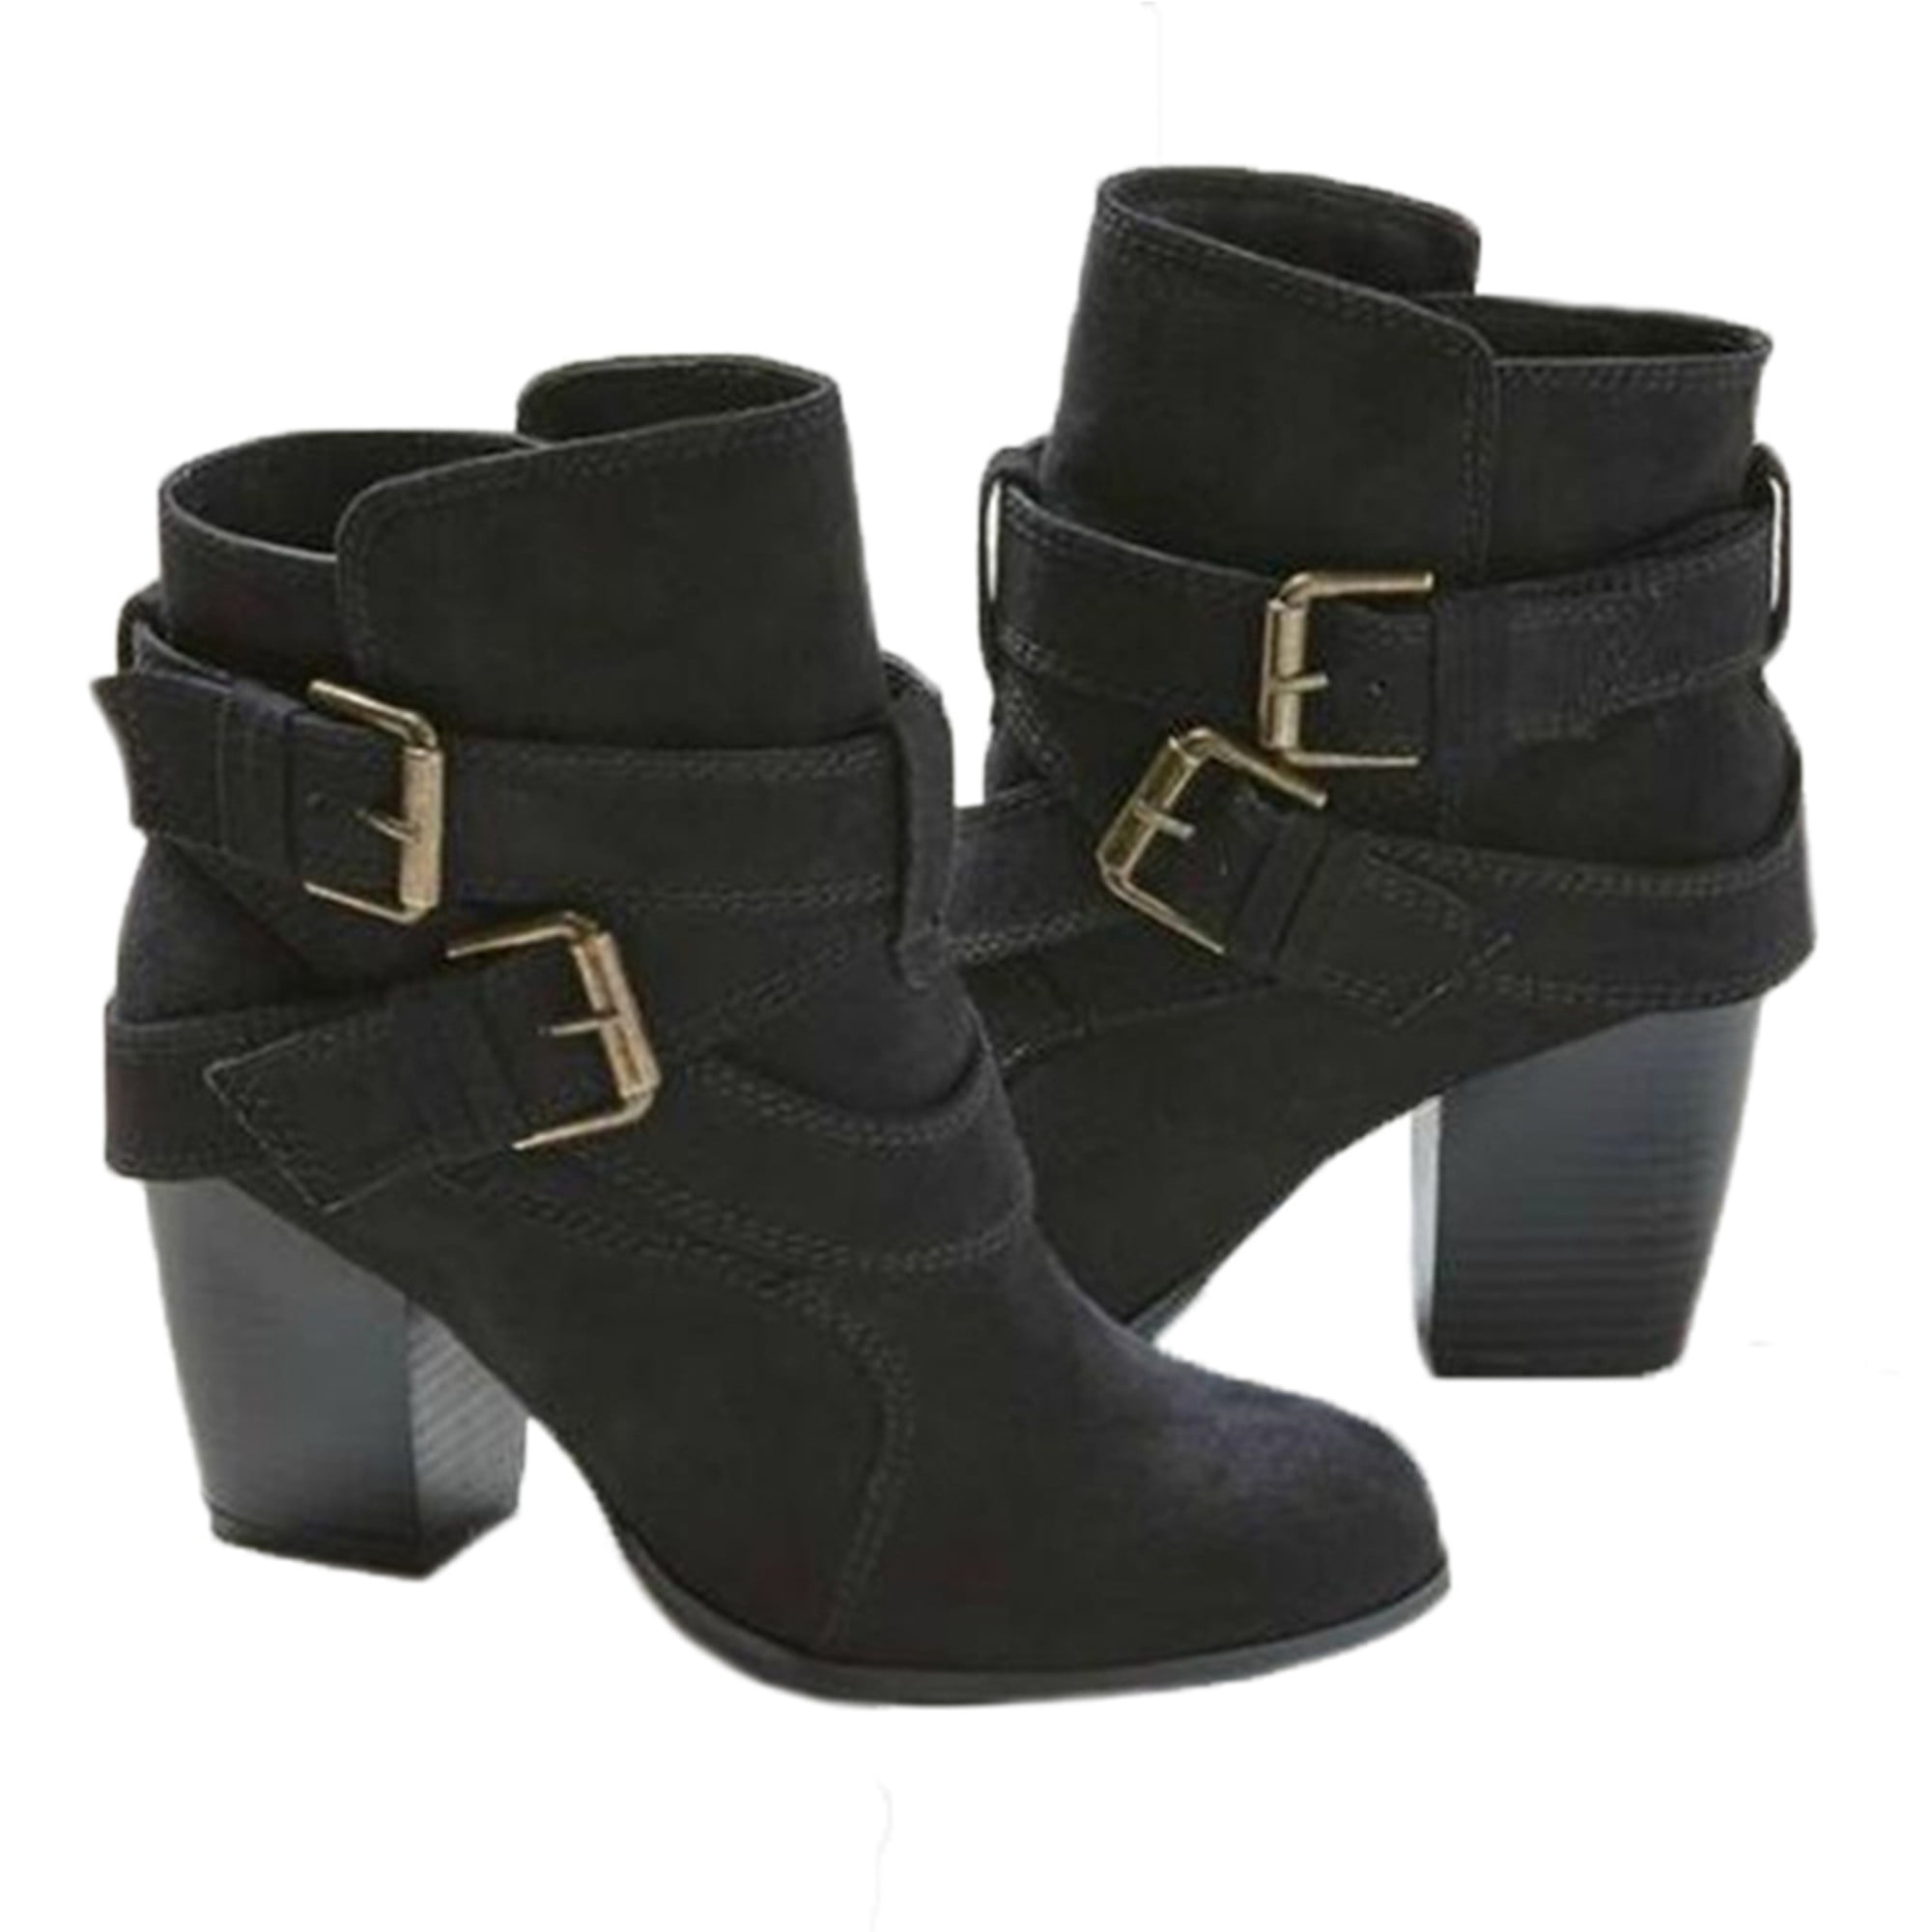 New Ladies Ankle Boots Women Casual Mid High Block Heel Faux Suede Style Shoes 